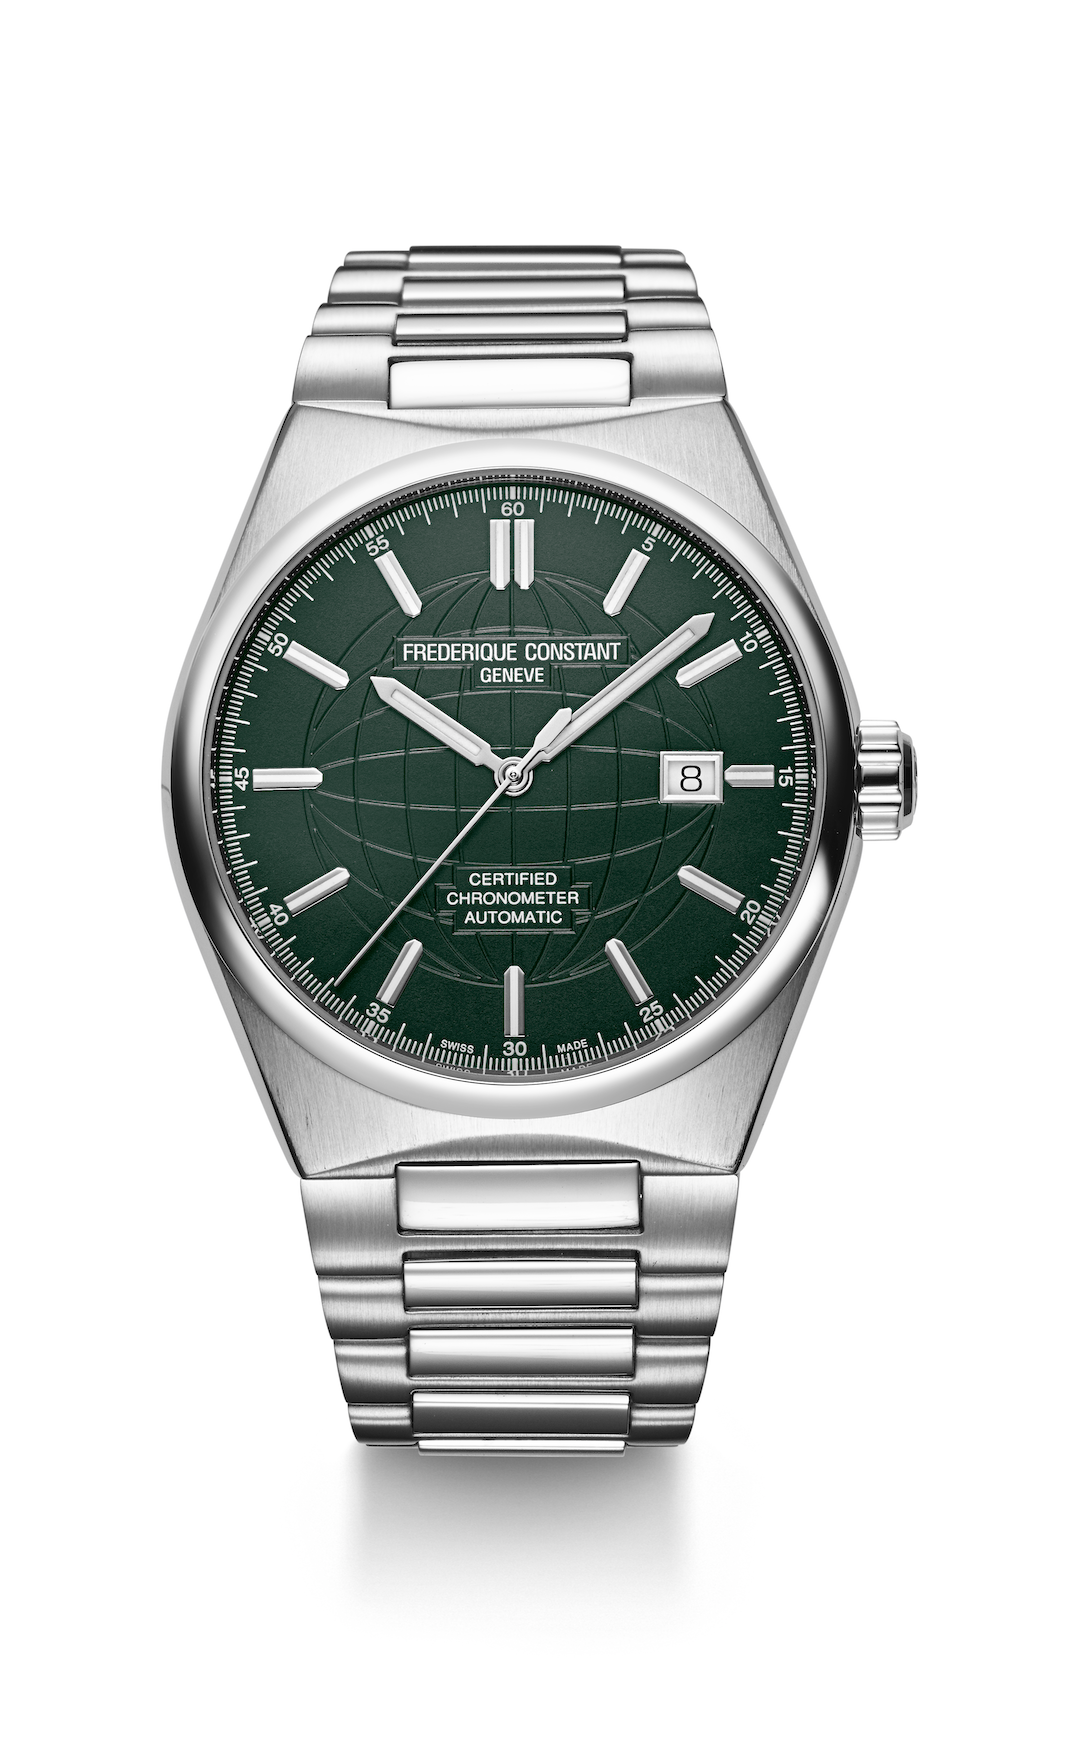 Frederique Constant_Limitierte Edition_Highlife Green Editon Germany_Soldat_01